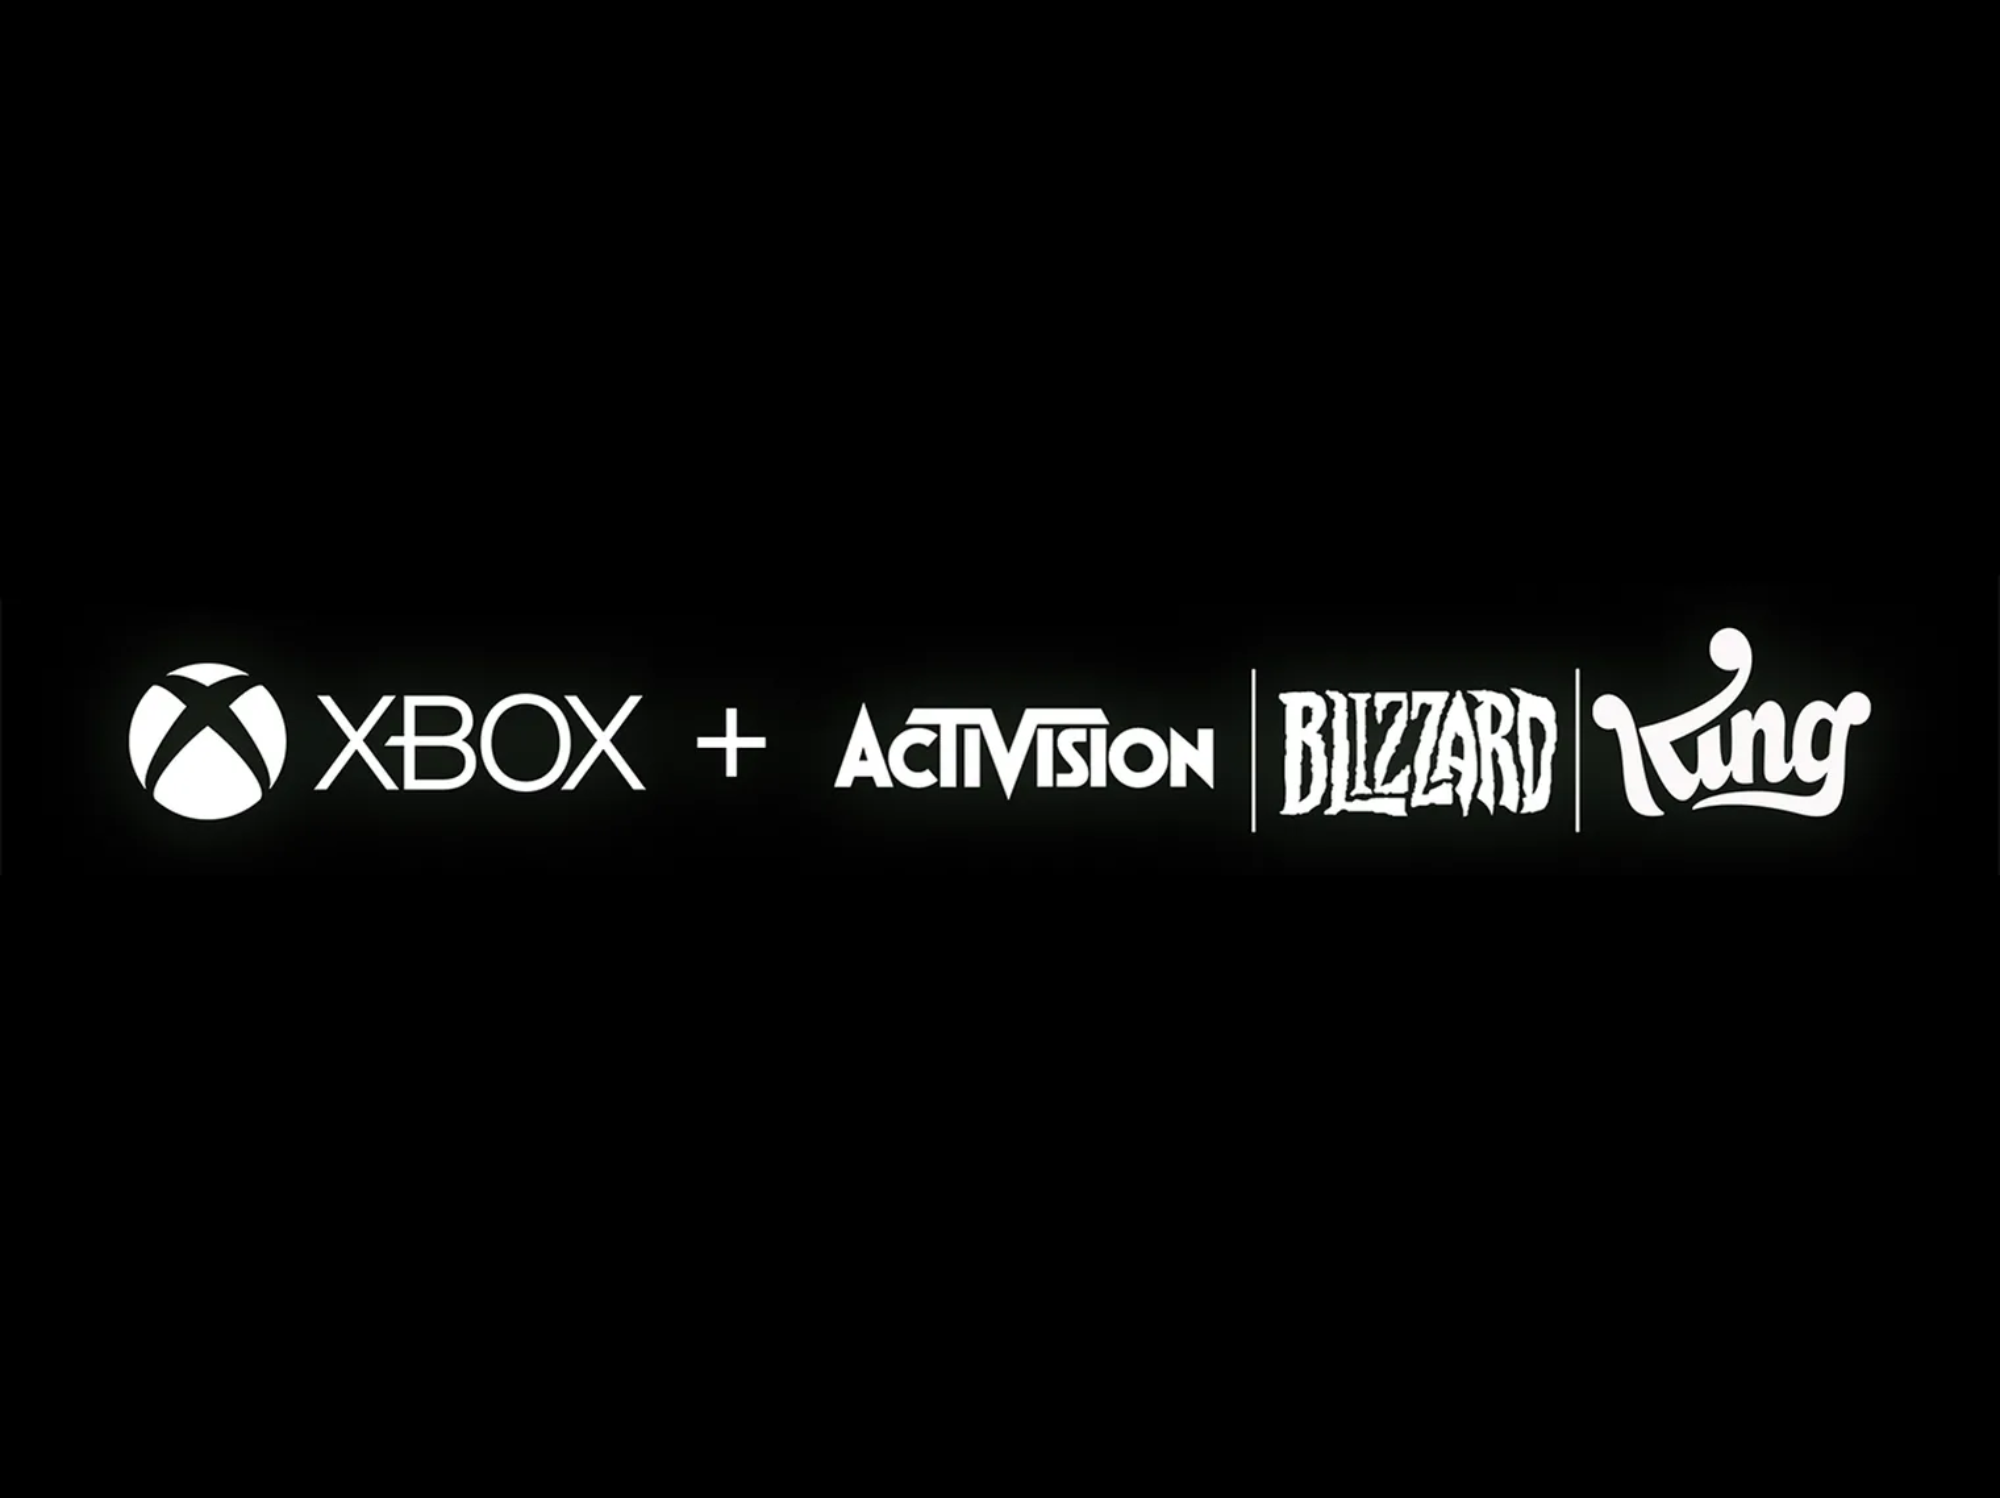 In the Land of Trillion Dollar Goliaths | Microsoft is planning to acquire Activision Blizzard for $68.7 billion